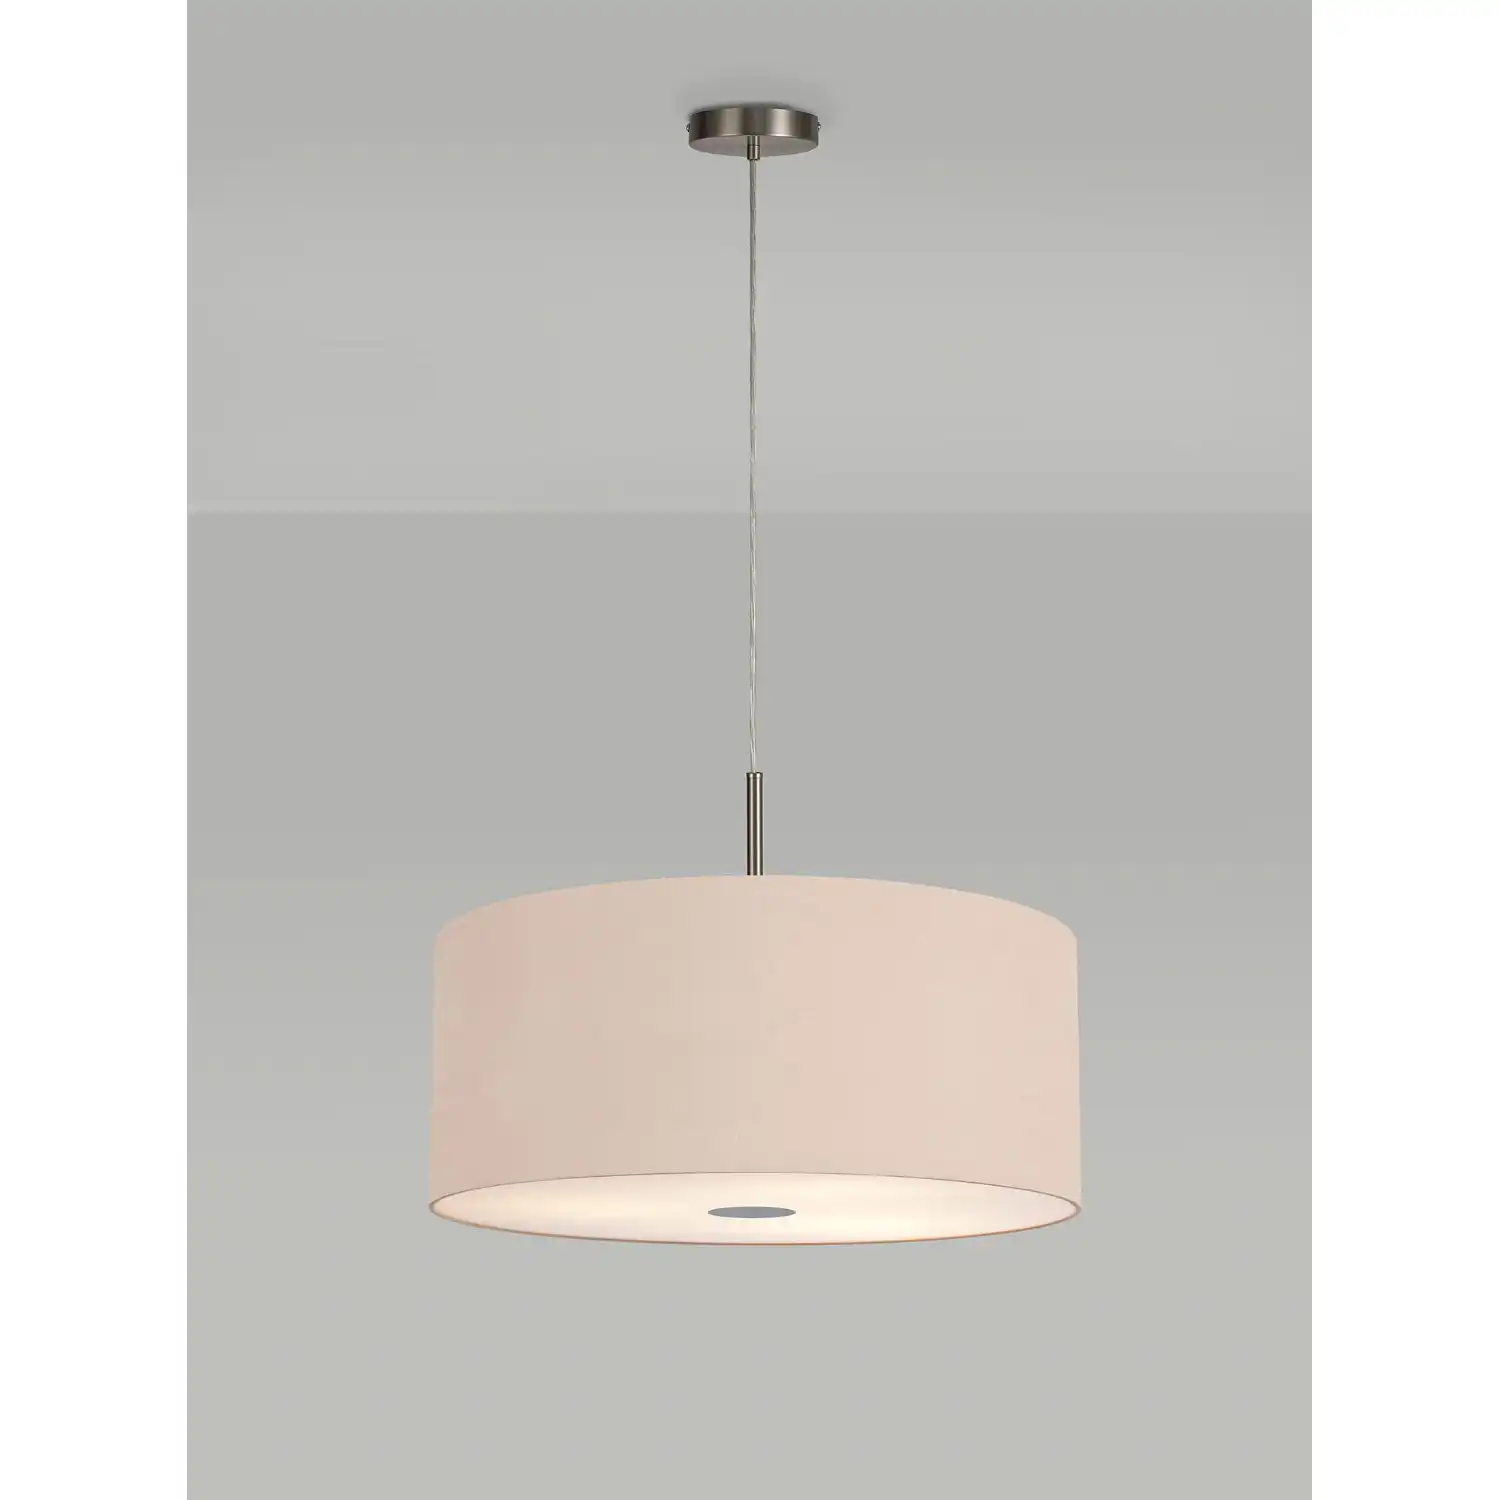 Baymont Satin Nickel 3m 5 Light E27 Single Pendant c w 600 x 220mm Dual Faux Silk Fabric Shade, Antique Gold Ruby And 600mm Frosted PC Acrylic Diffuser